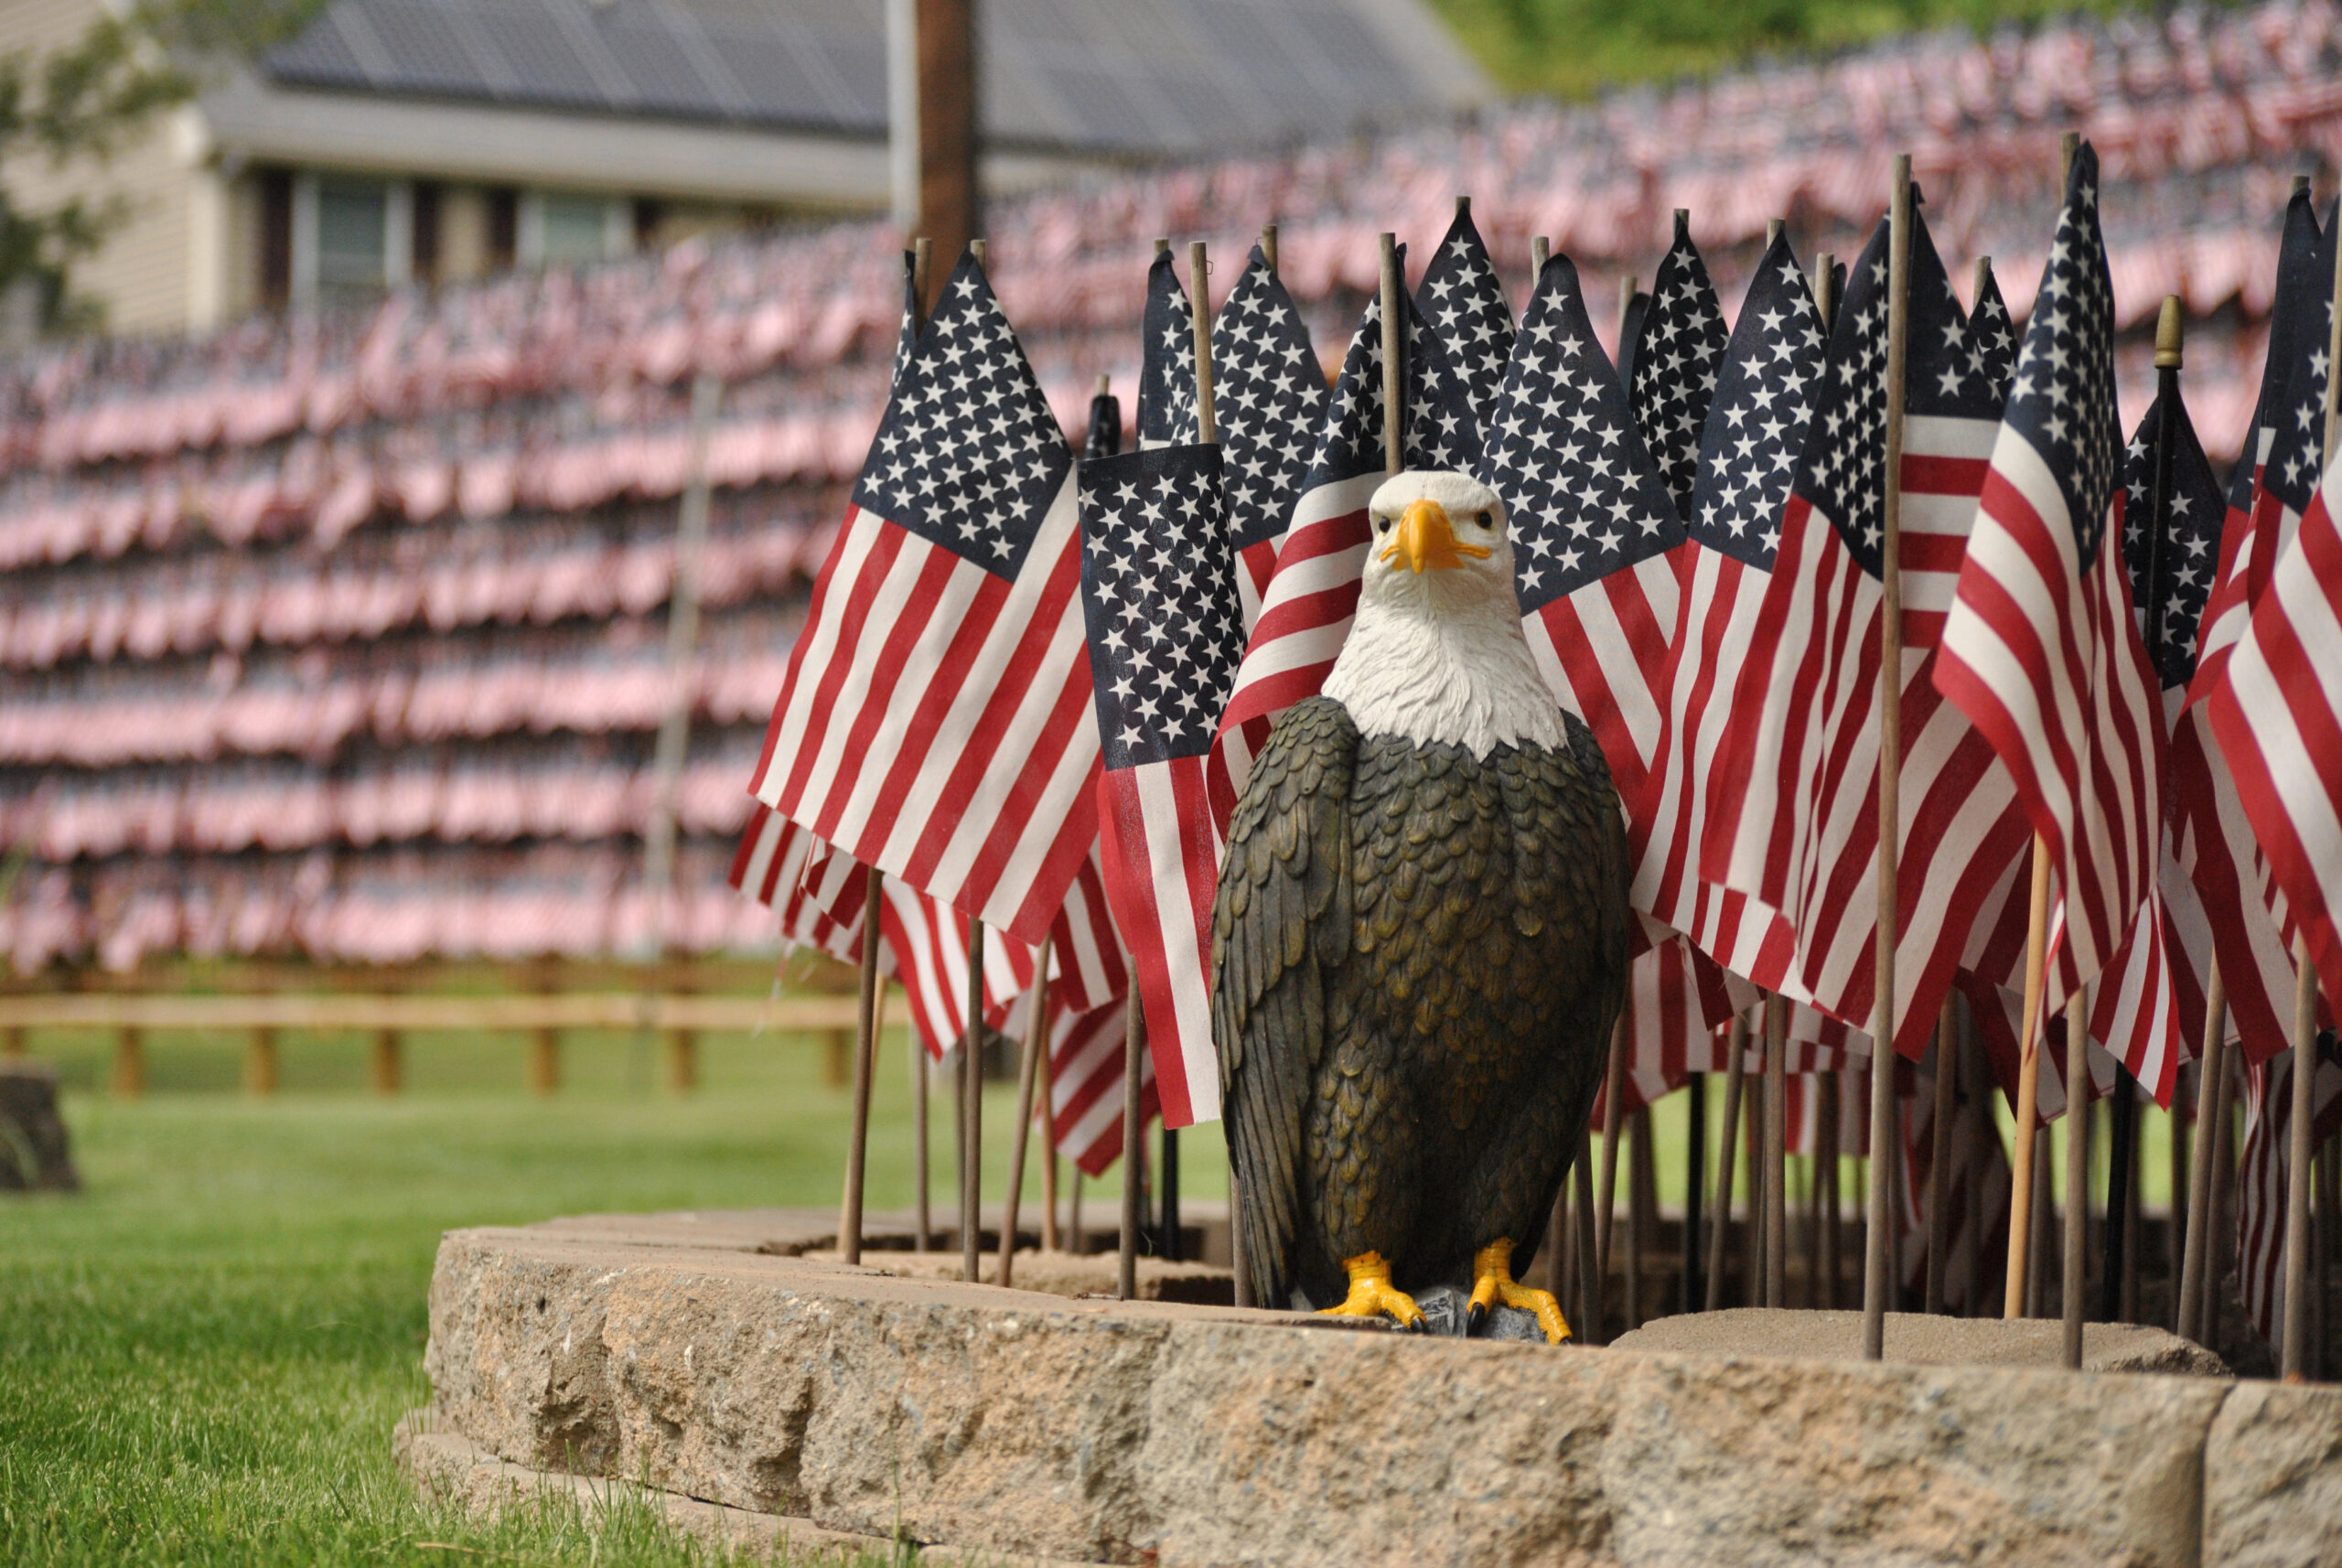 A statue of an eagle looks out from a flower bed filled with flags memorializing COVID-19 victims in Massachusetts.